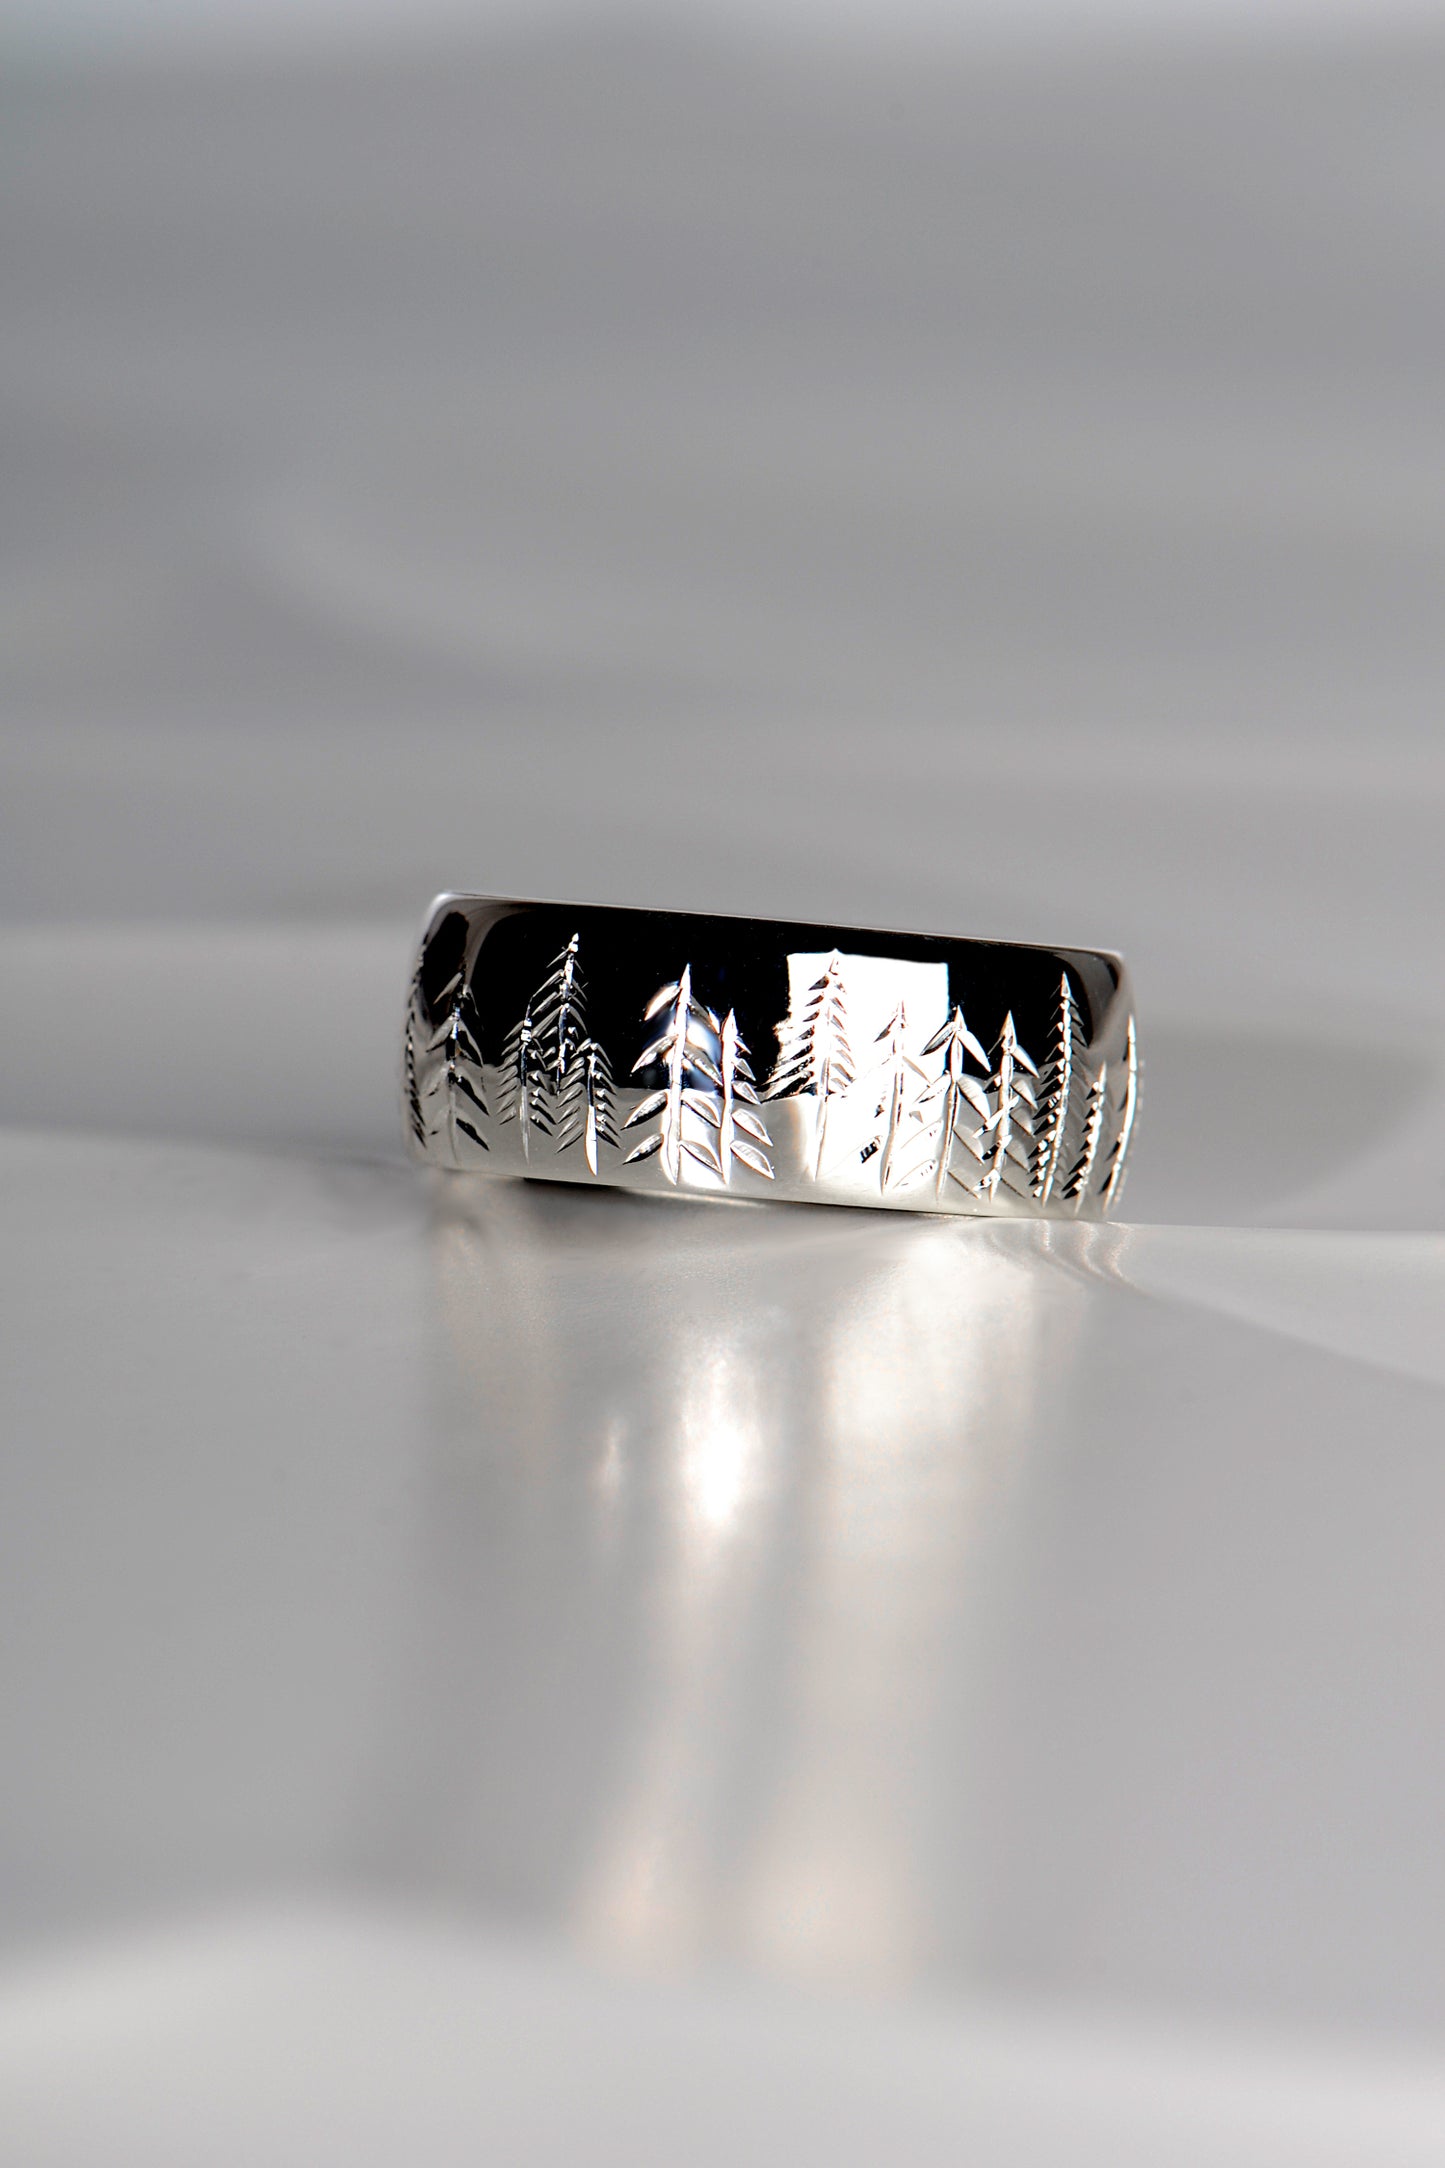 Hand Engraved Trees Ring